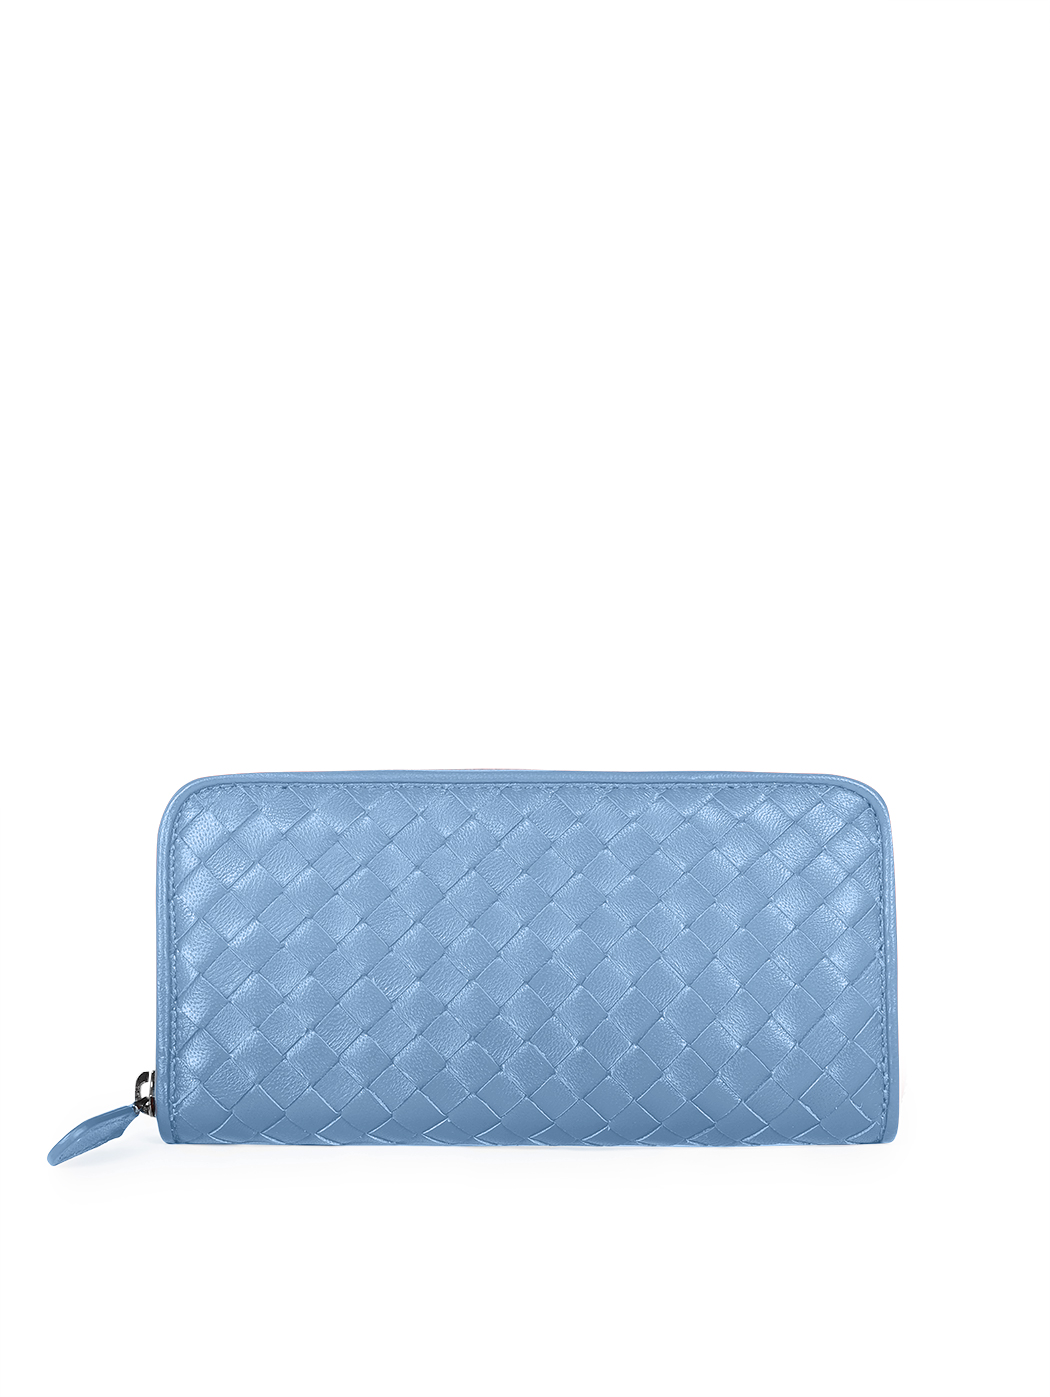 Long zip-around wallet in light blue woven leather